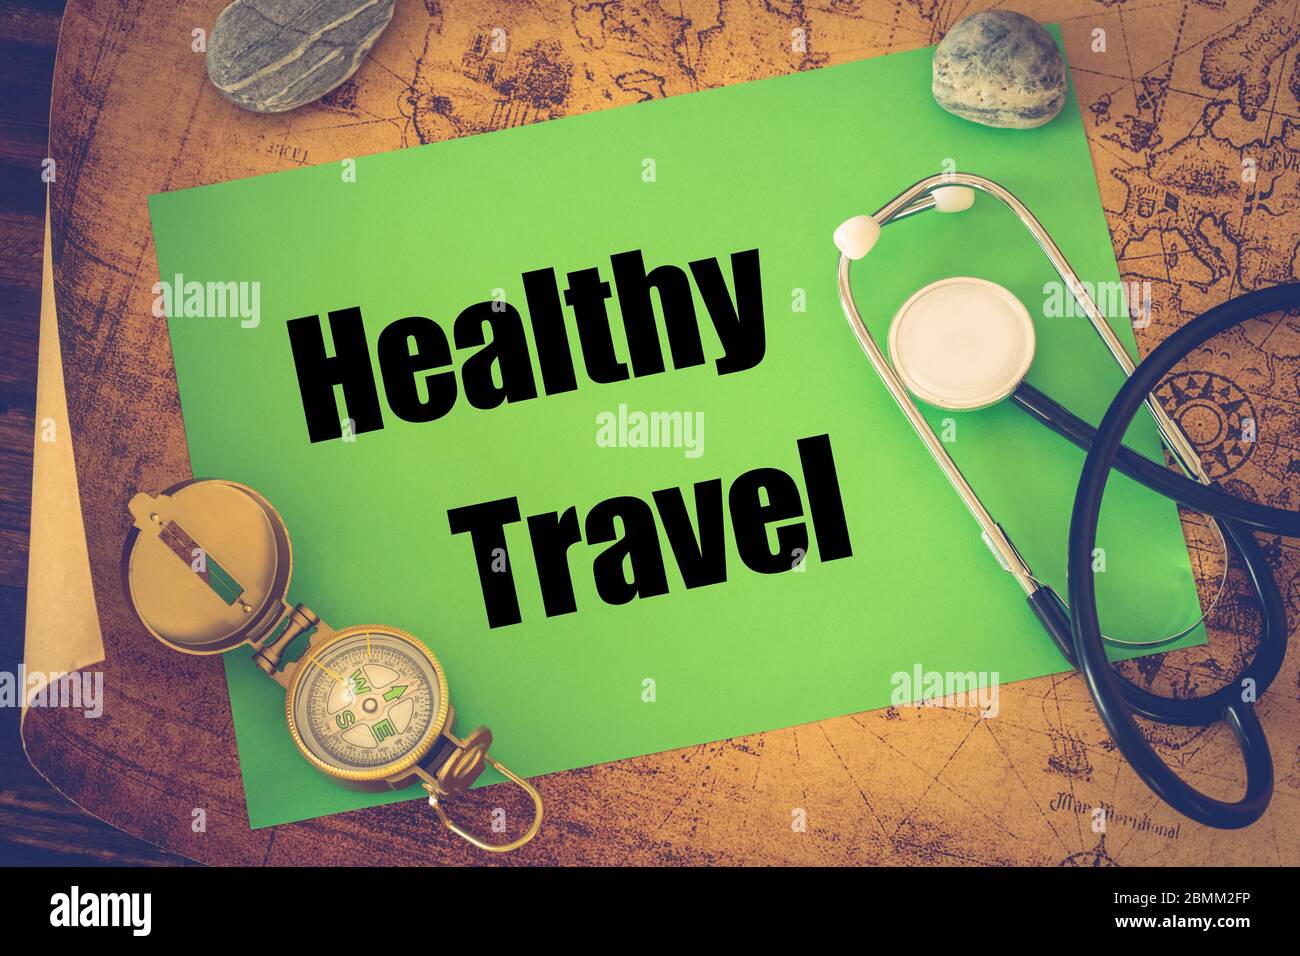 Medical stethoscope, compass and a card with the words 'Healthy Travel' on the background of an old map of the world, The concept of safe travel Stock Photo